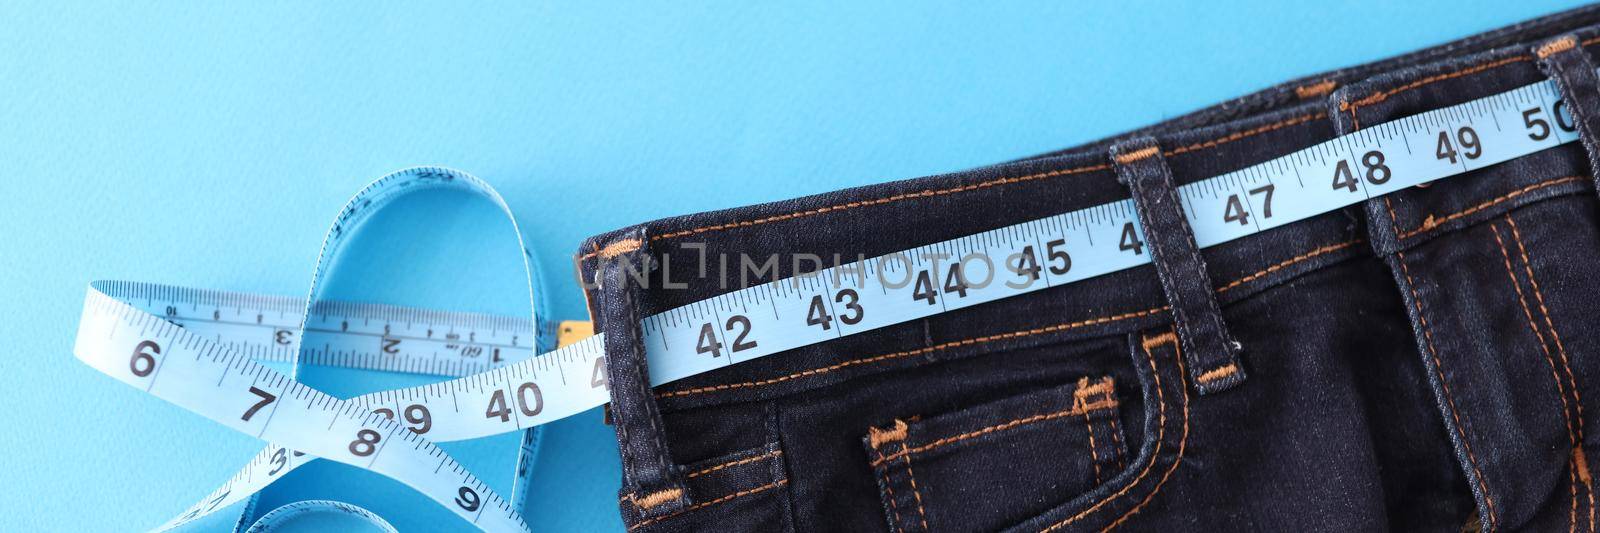 Measuring sewing tape lies on jeans on a blue background, close-up. Measurement of clothing size, tailoring and repair in the atelier